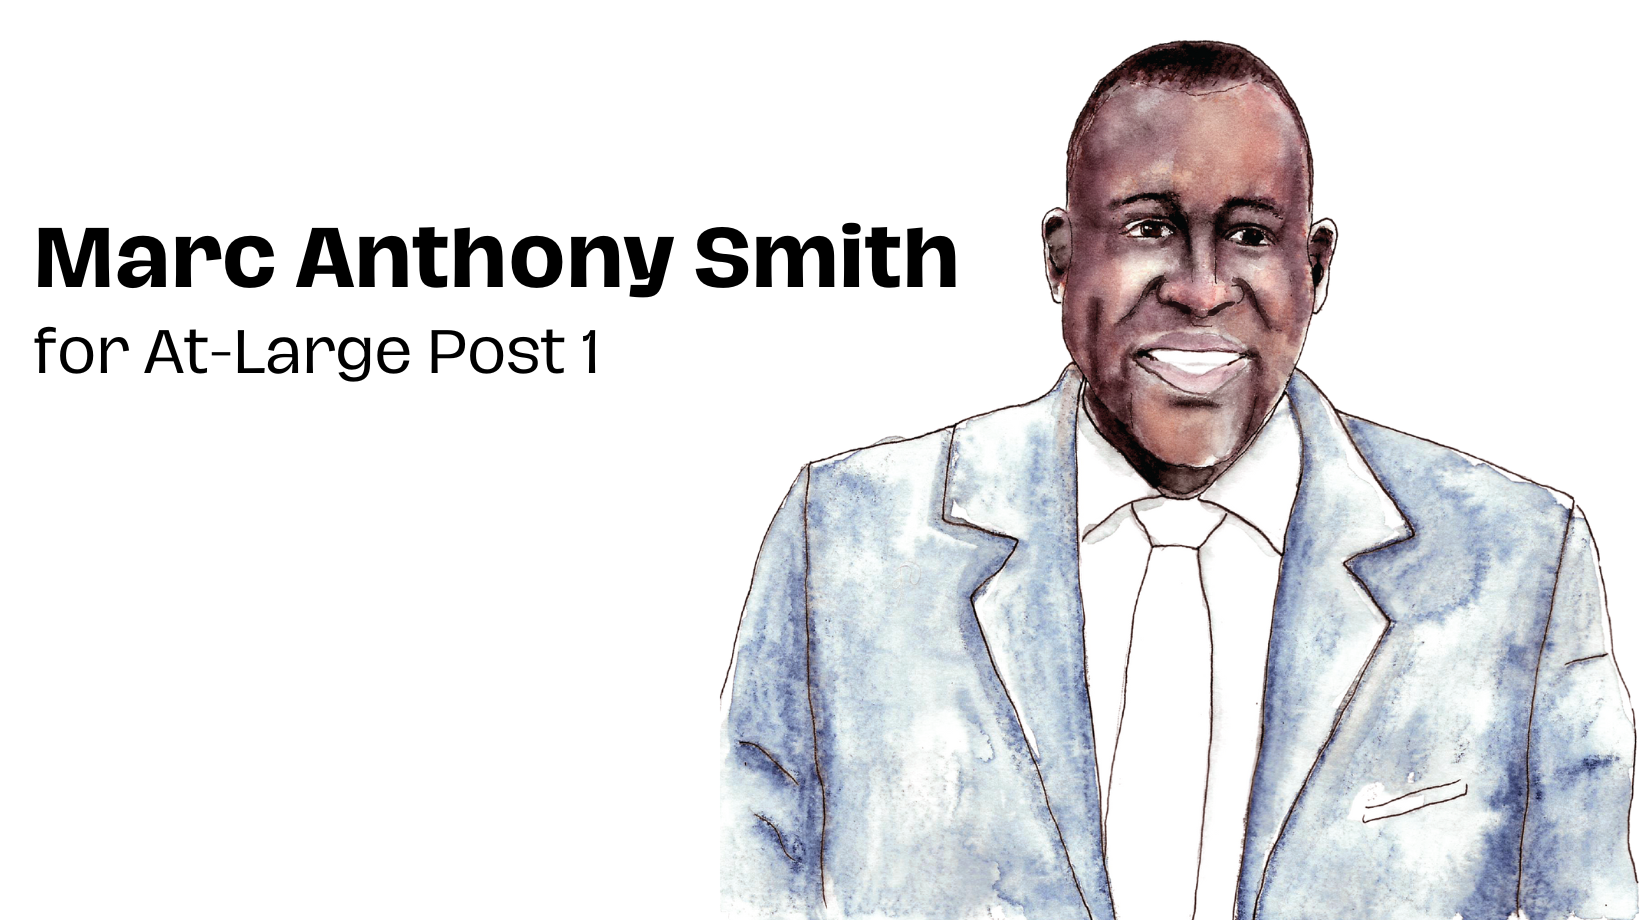 City Council Coverage: Marc Anthony Smith for At-Large Post 1